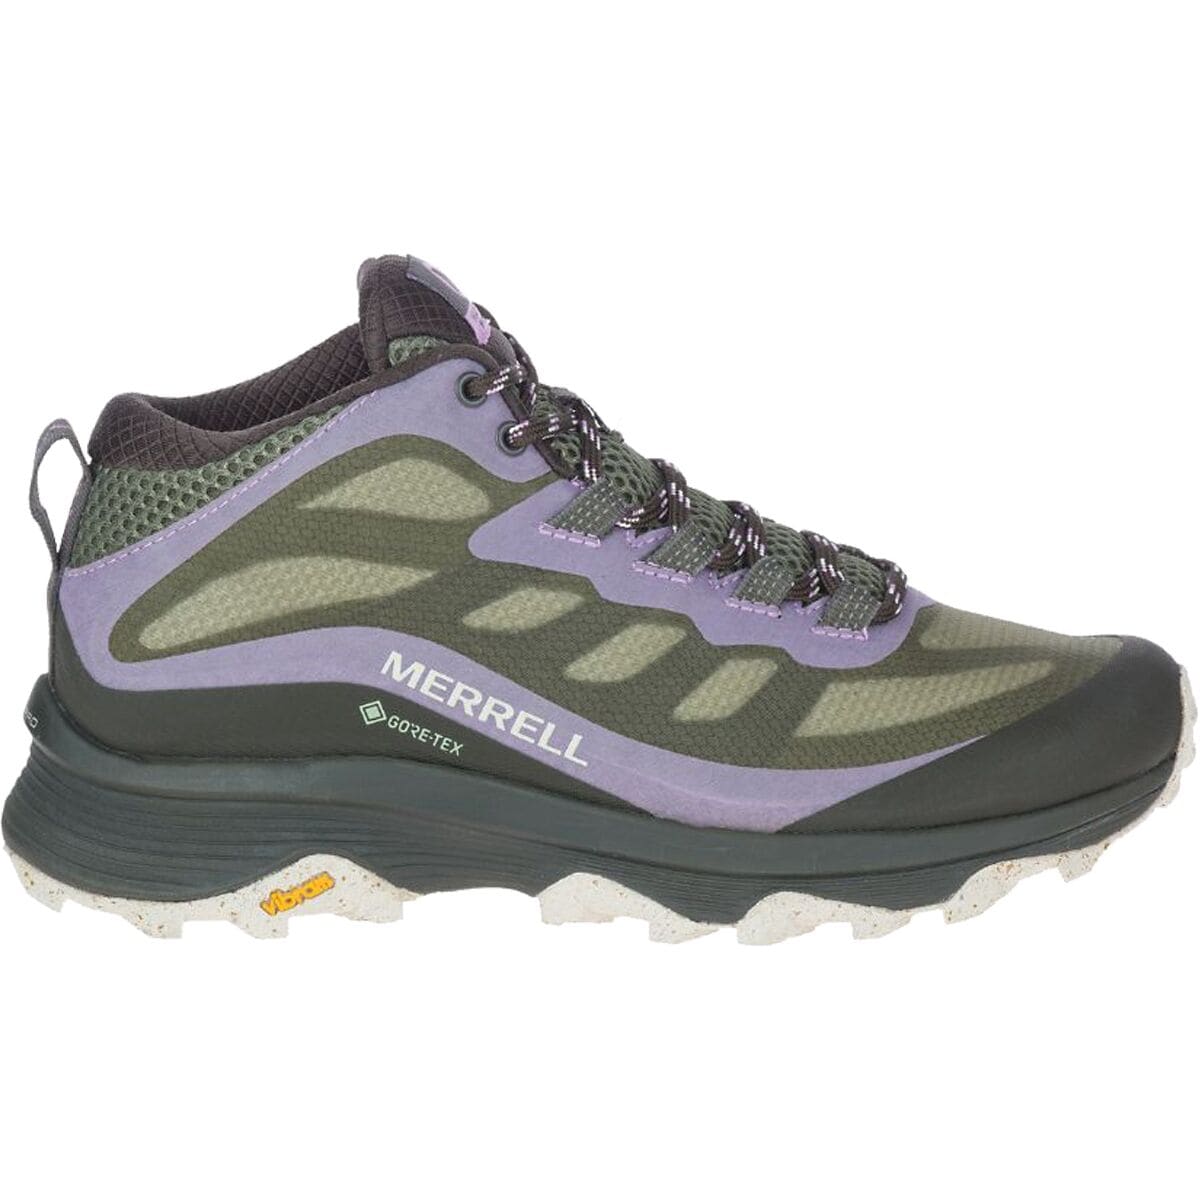 Moab Speed GORE-TEX Hiking by Merrell | US-Parks.com